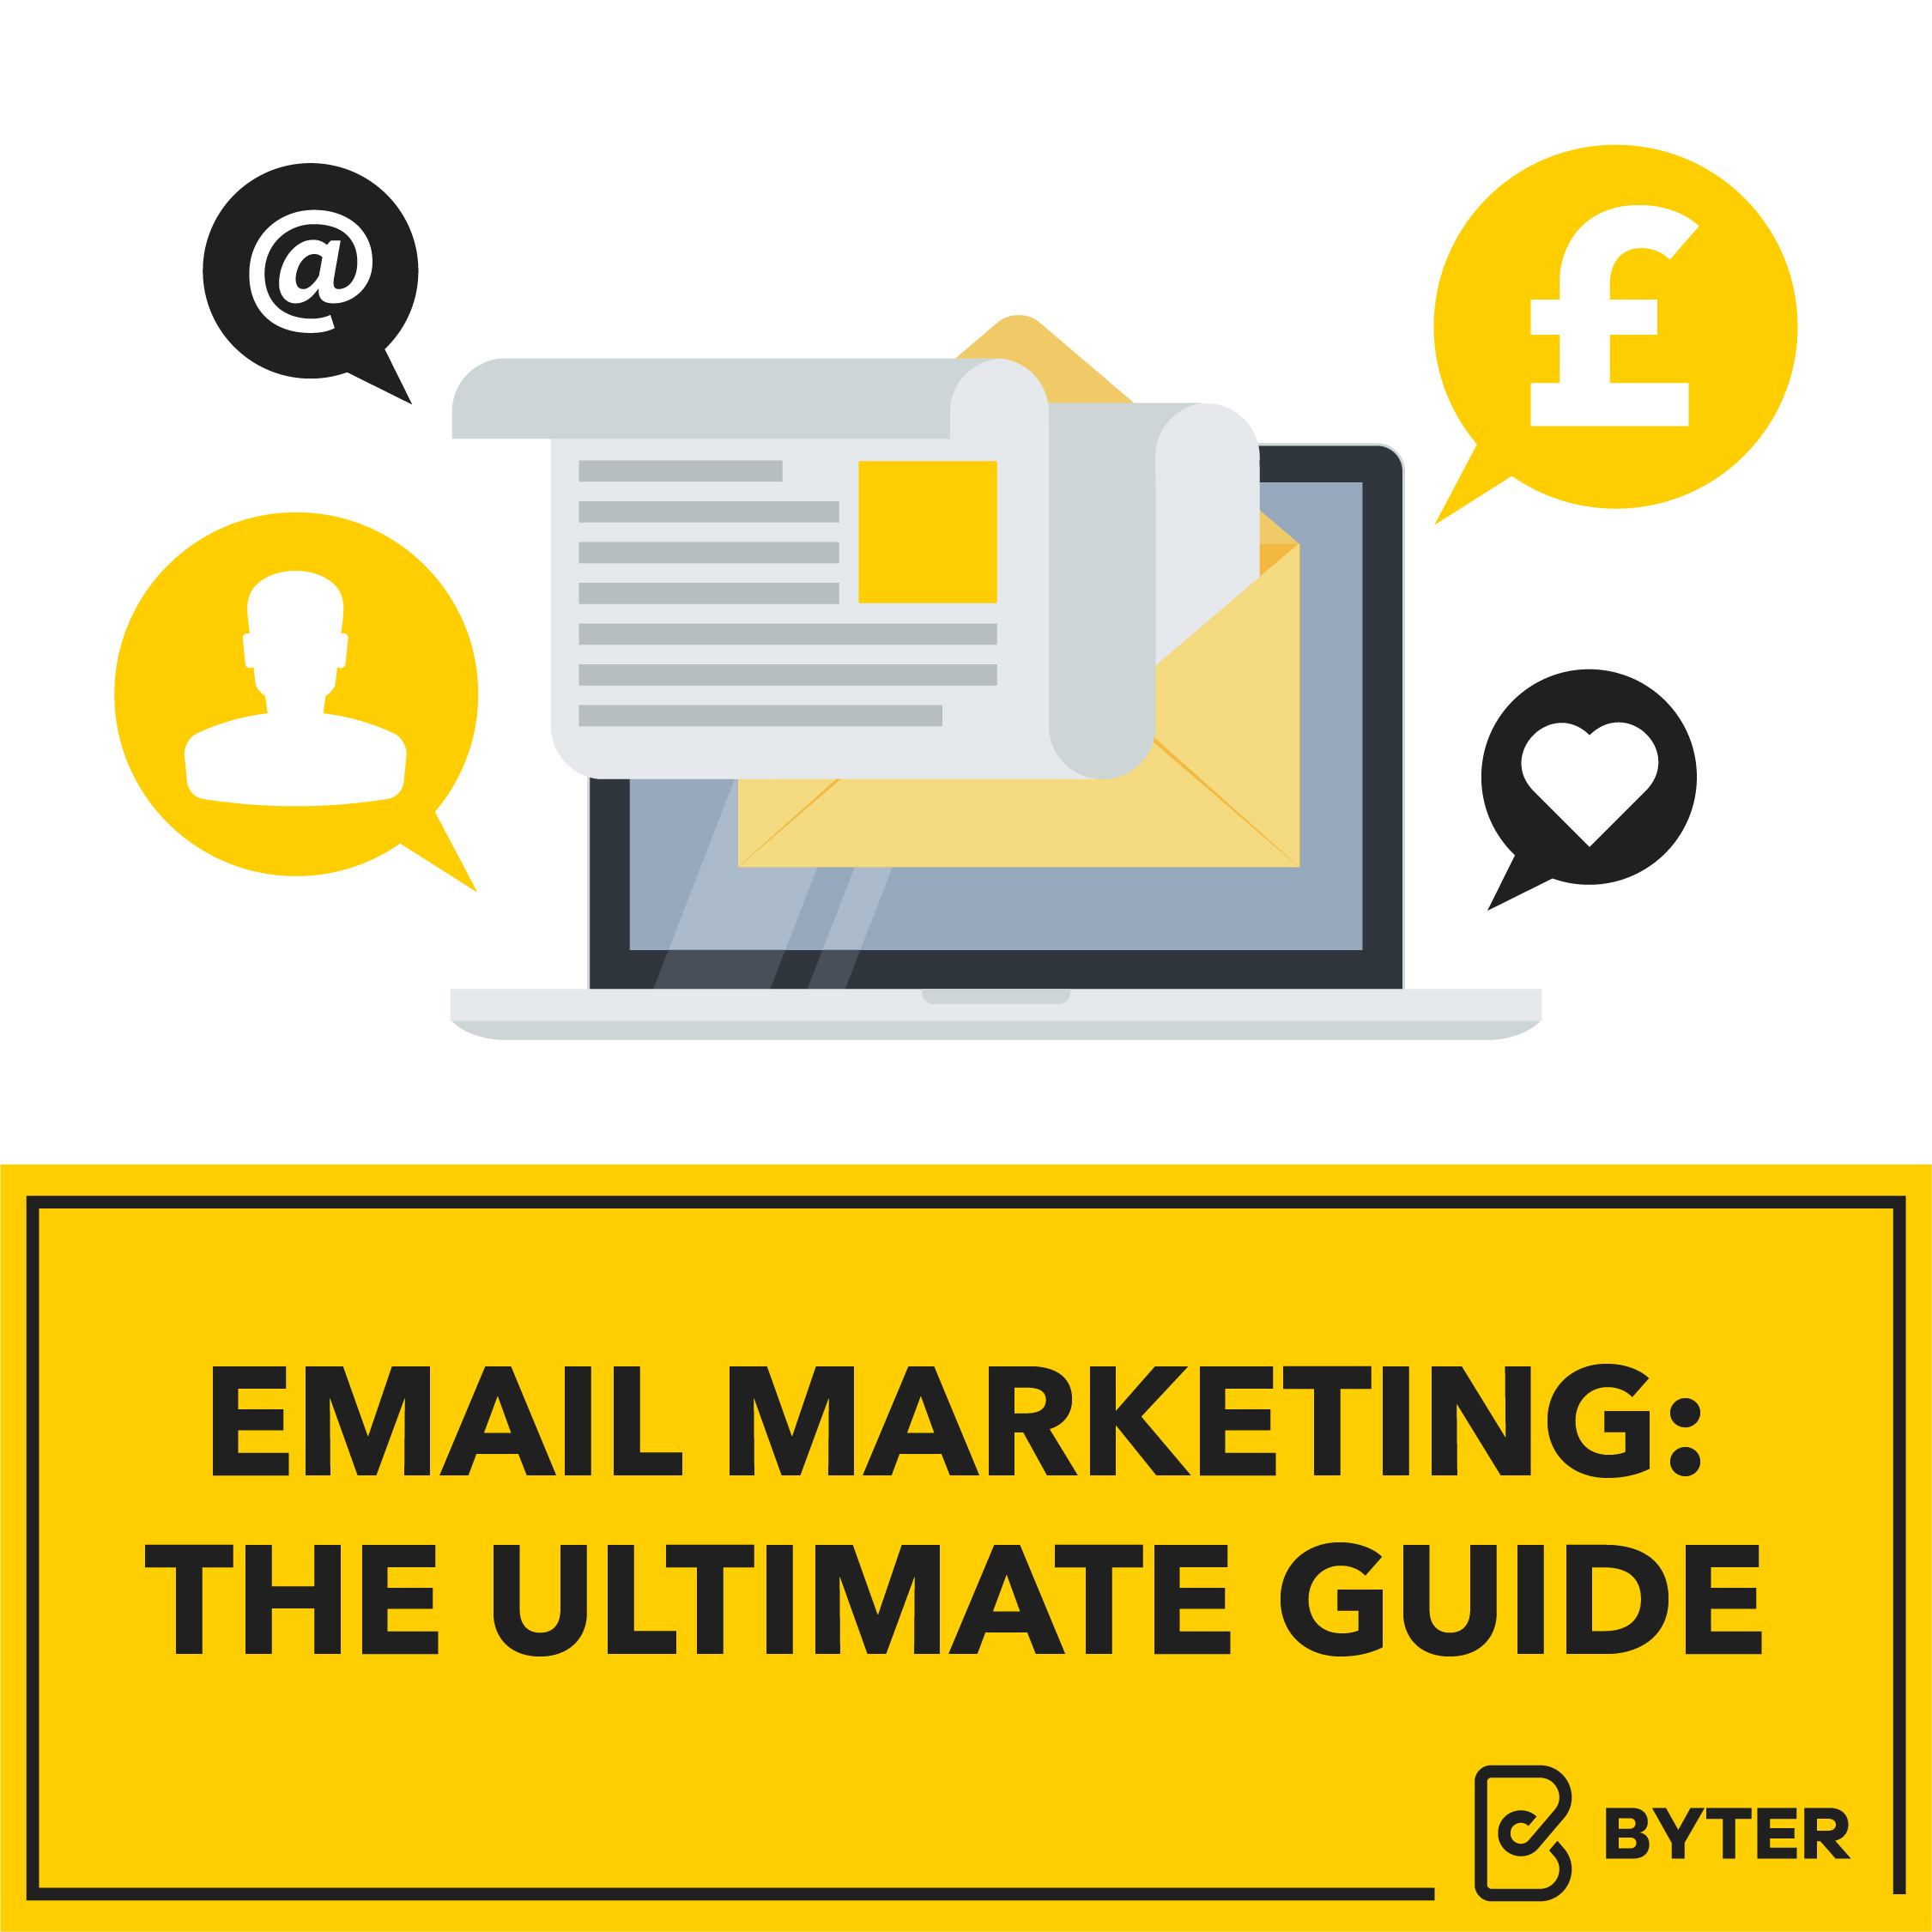 Email Marketing: The Ultimate Guide